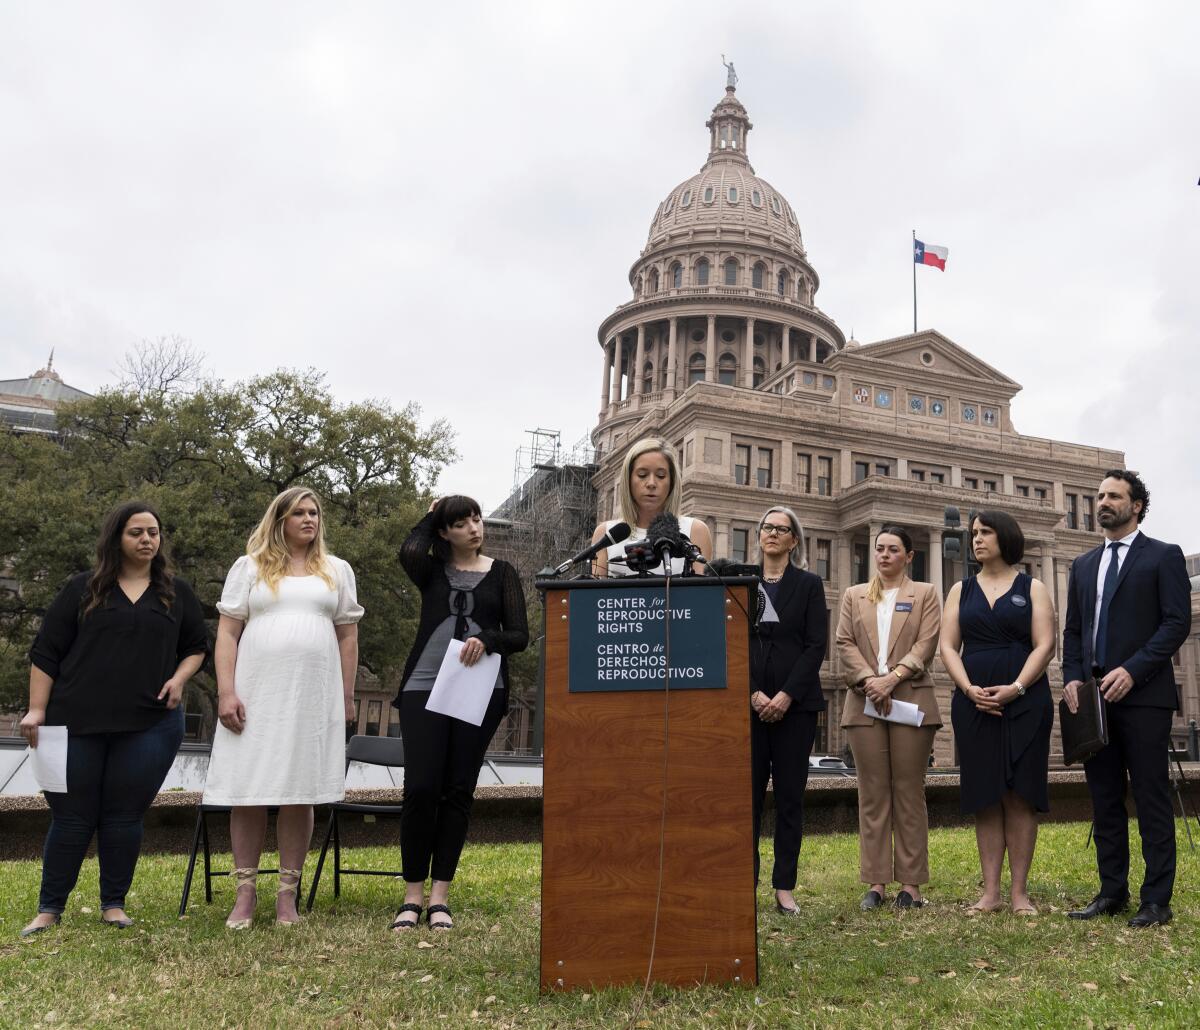 Amanda Zurawski speaks in front of the Texas Capitol while several people stand behind and on either side of her.